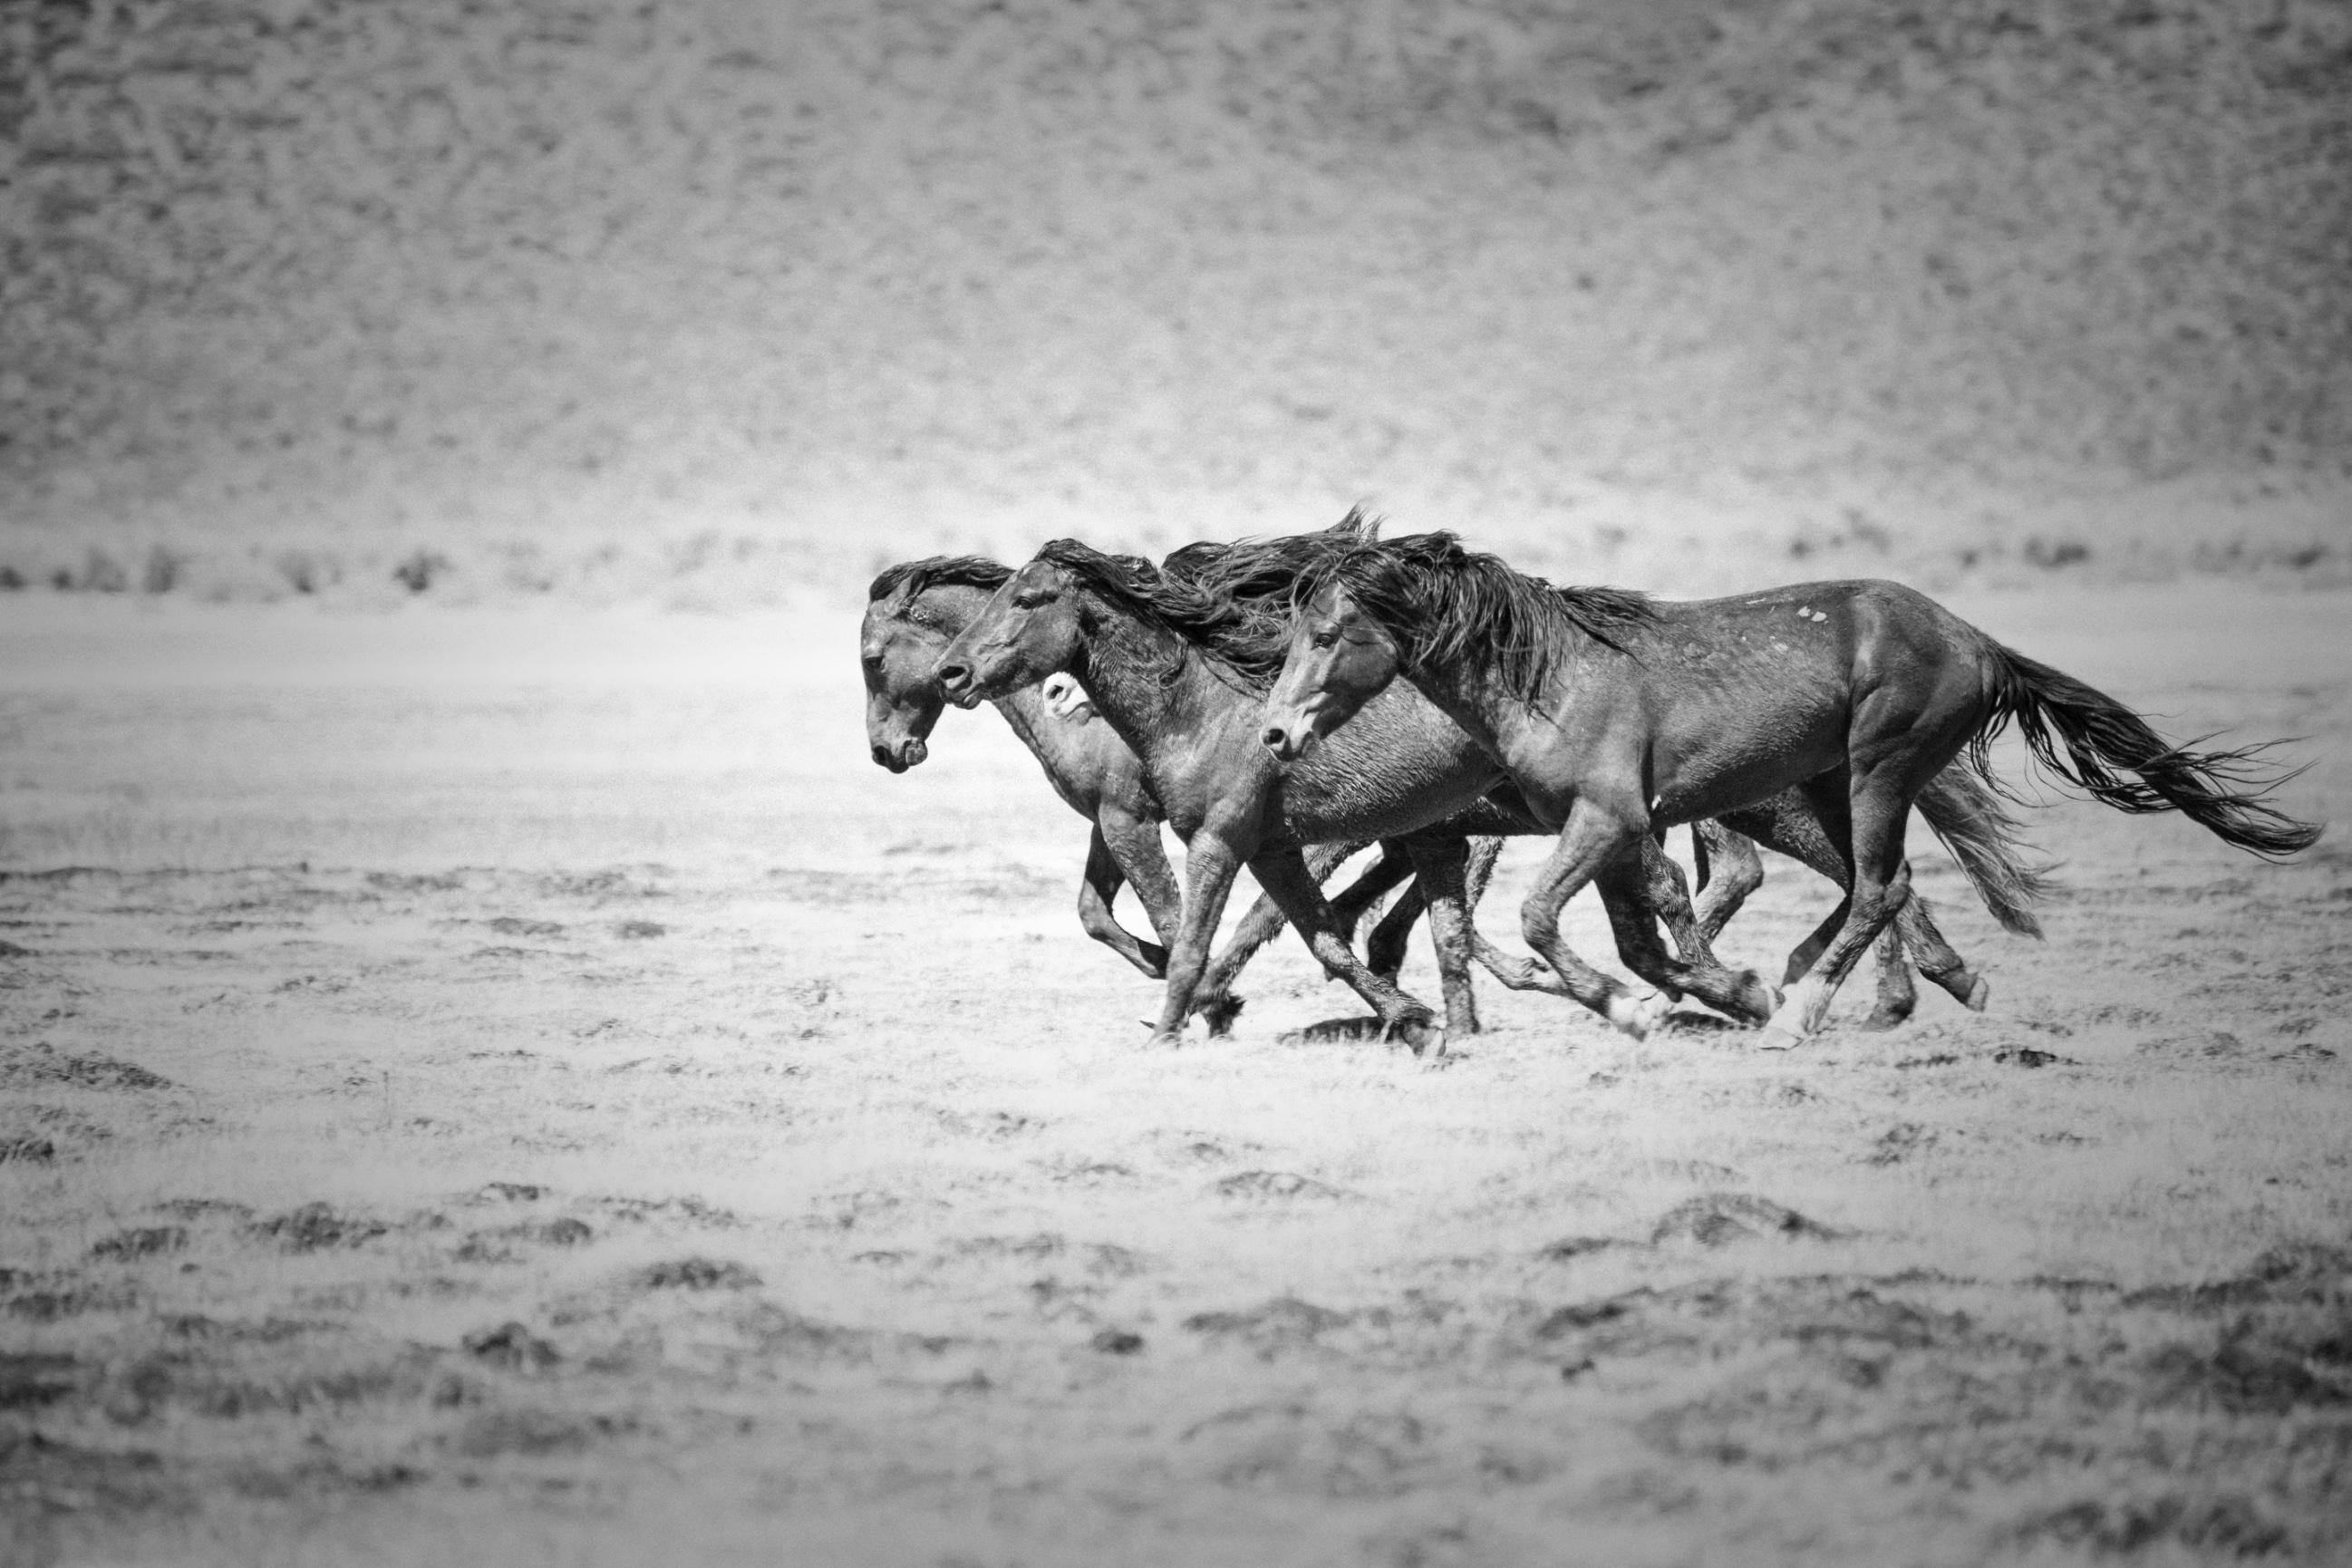 Black and White Photograph Shane Russeck -  36x48  Running Mustangs  - Photographie, photographie et impression de chevaux sauvages 